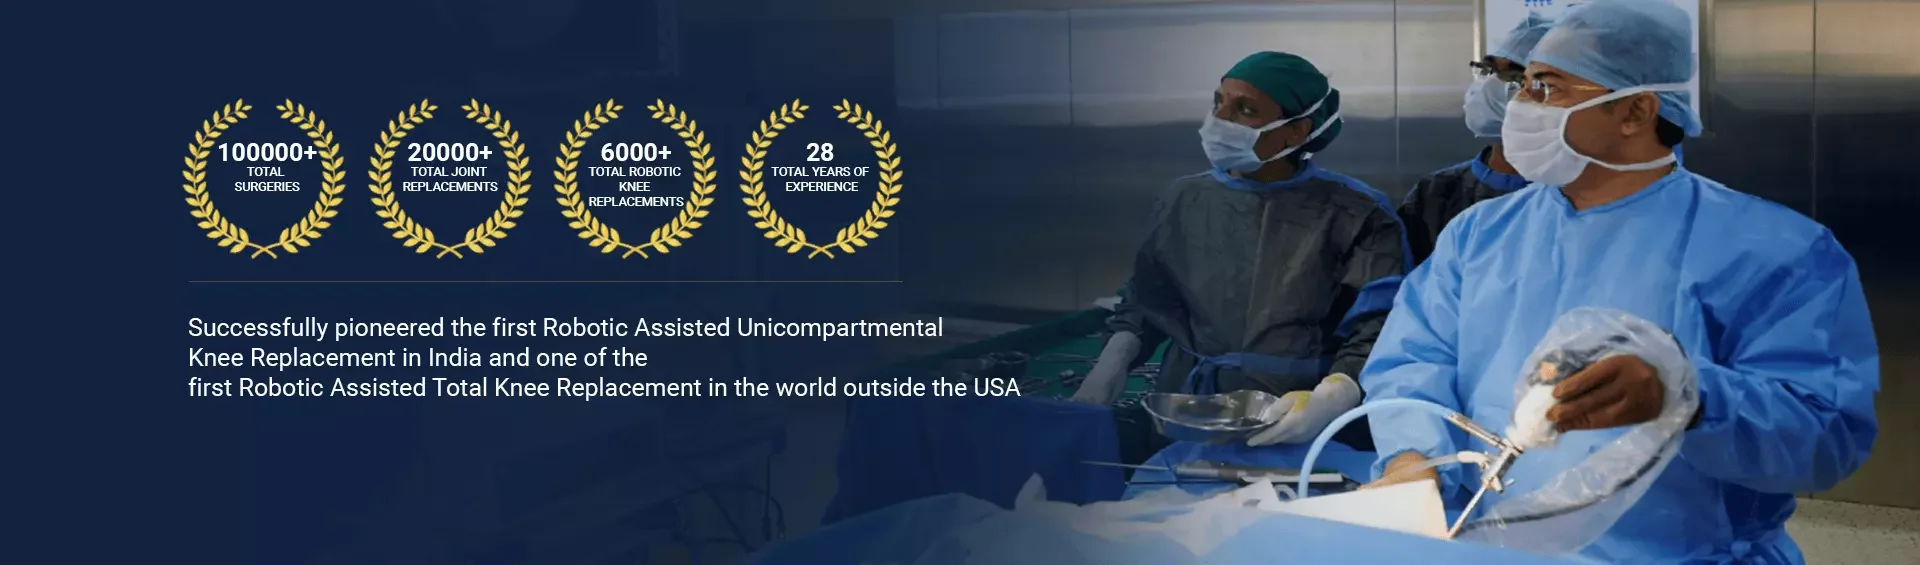 best knee replacement hospital in Pune, robotic knee surgery near me, robotic total knee replacement surgery